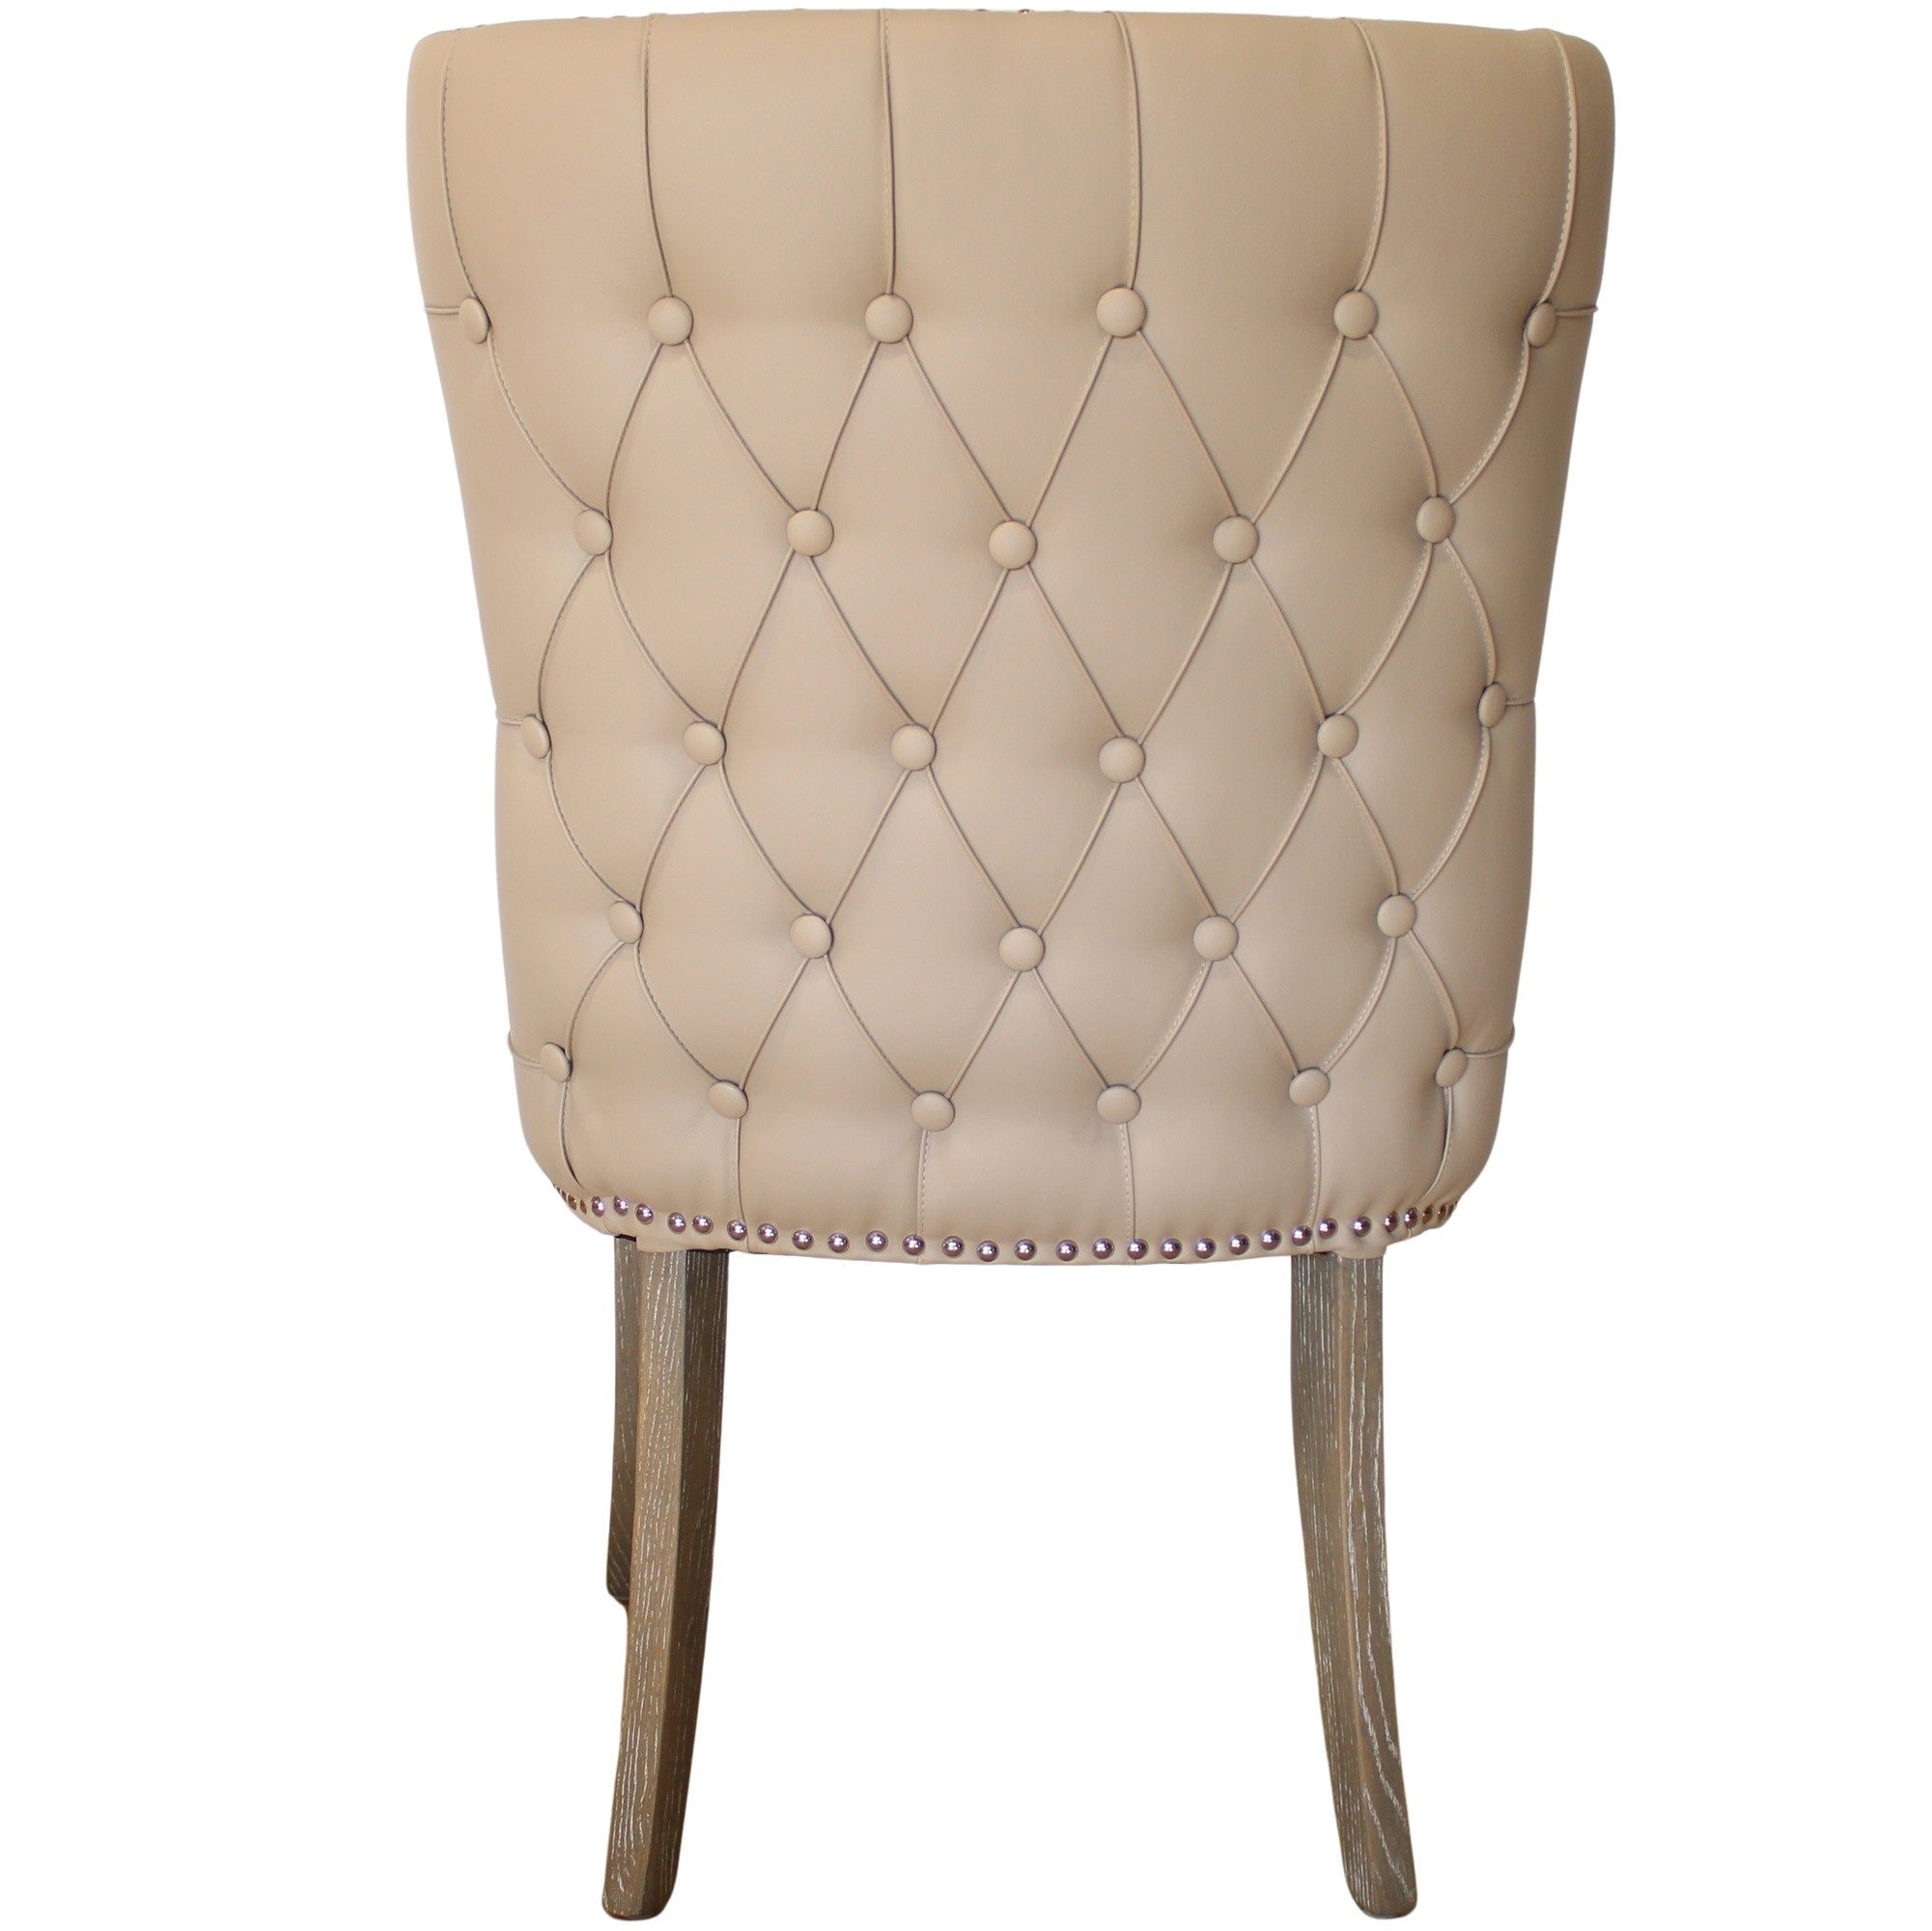 Amelia Chair Faux Leather